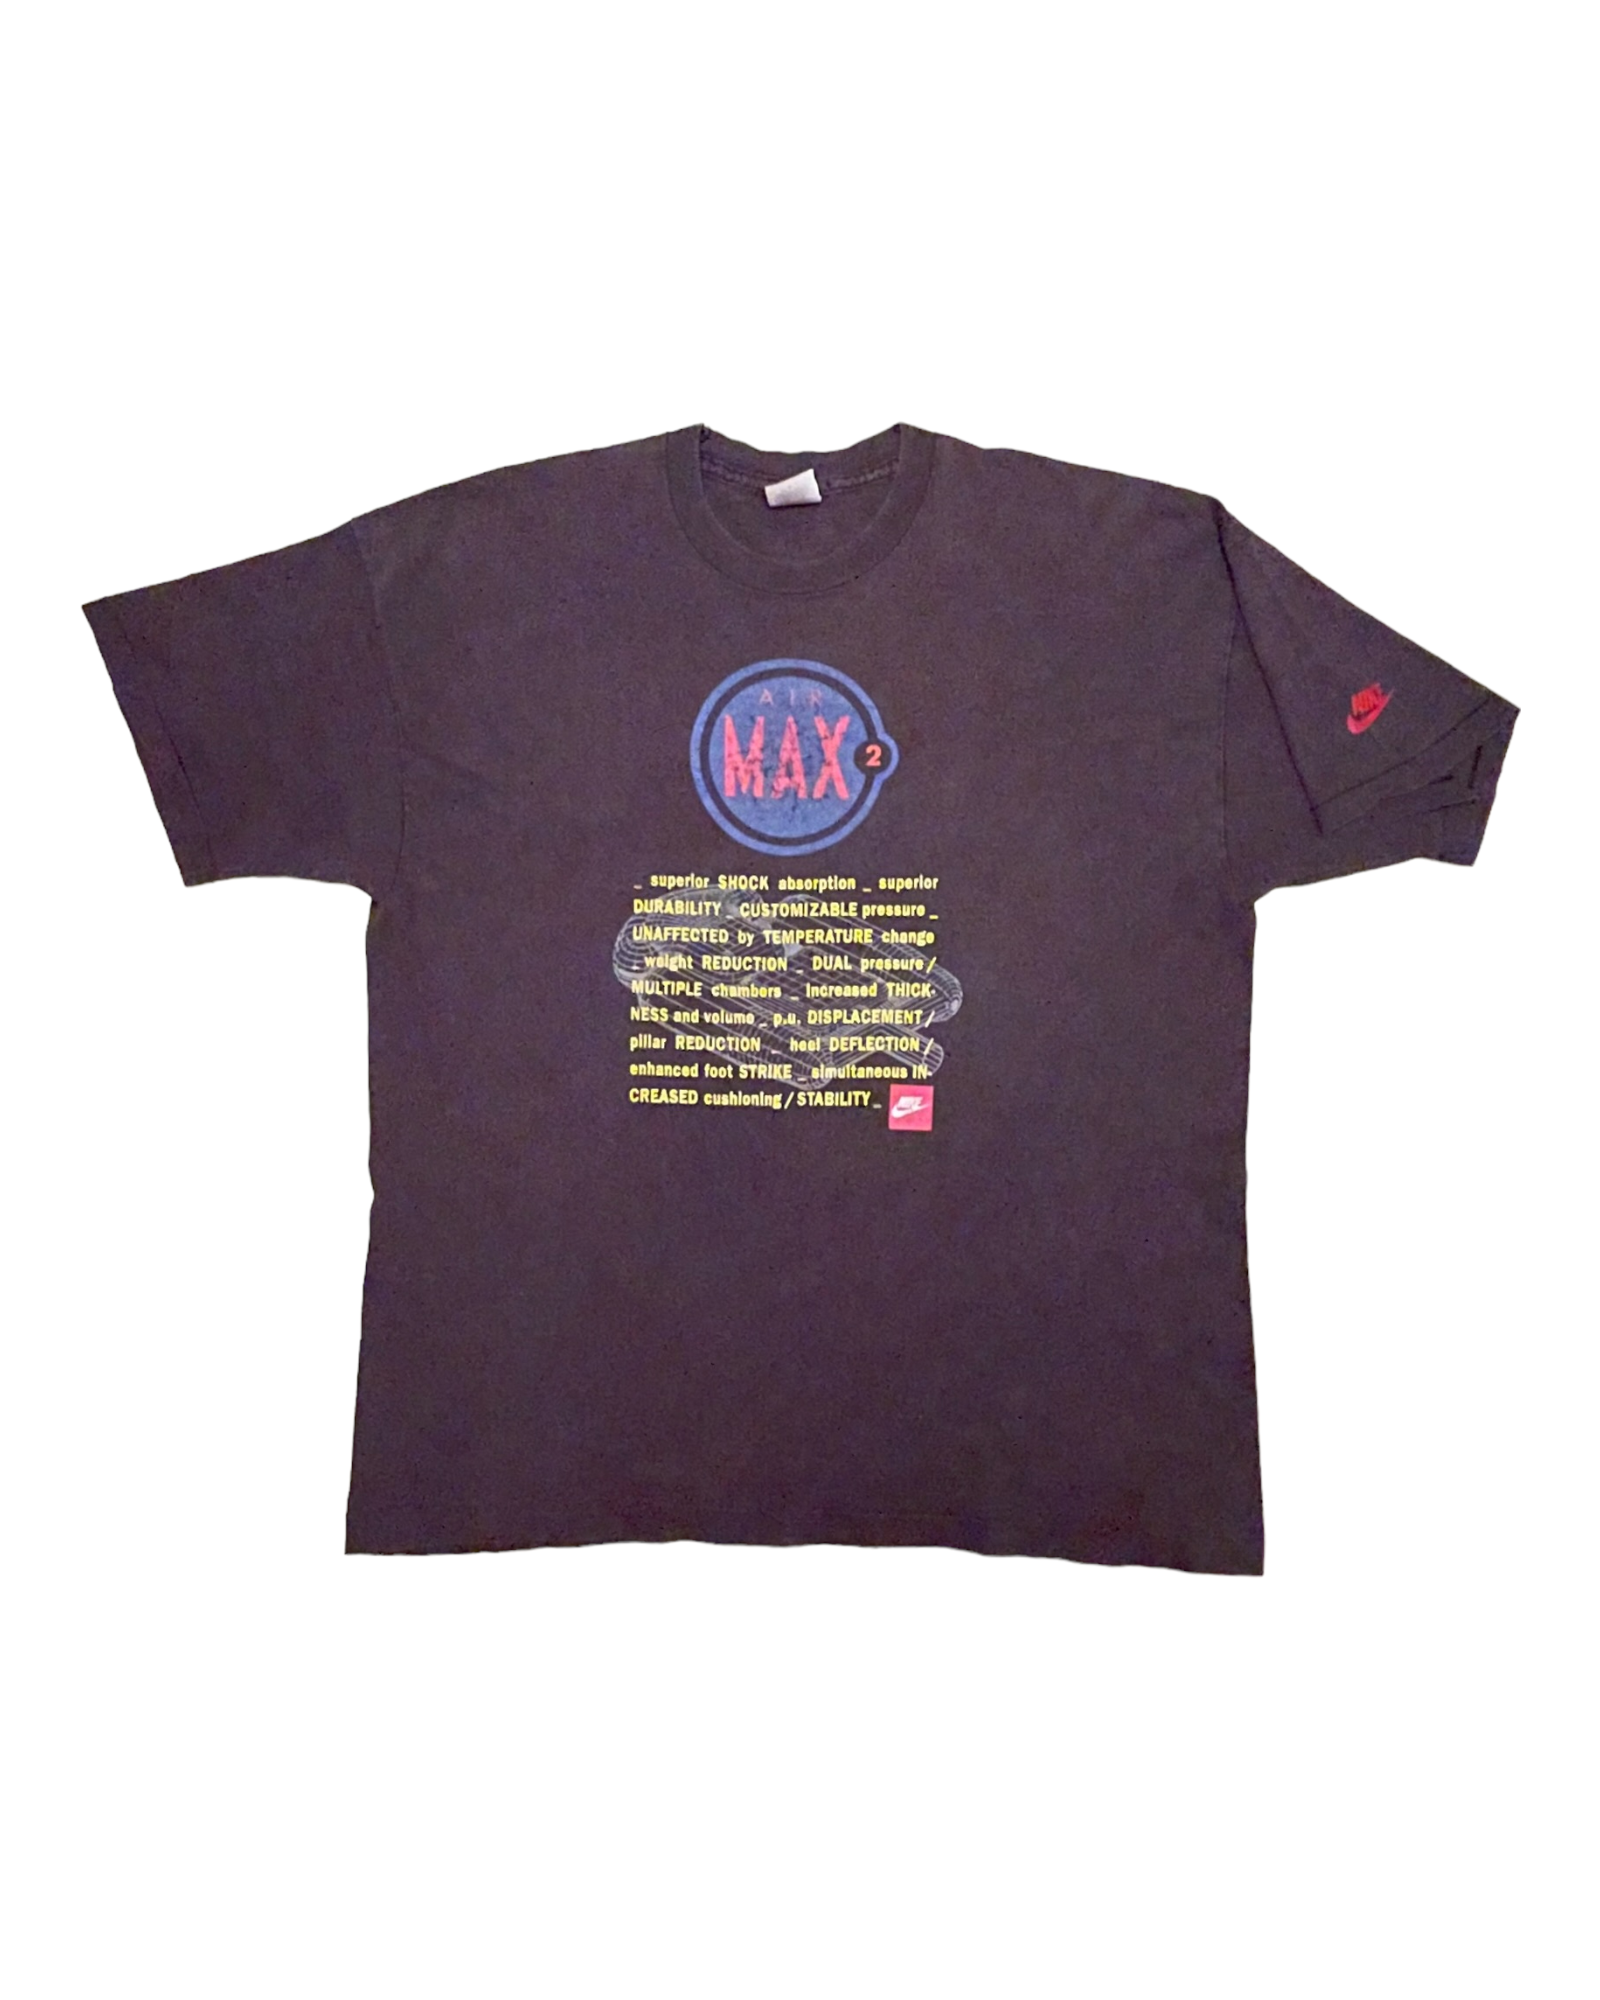 Vintage 90's Nike Air Max 2  T-shirt Washed Out Dark Grey Size XL Made in Ireland